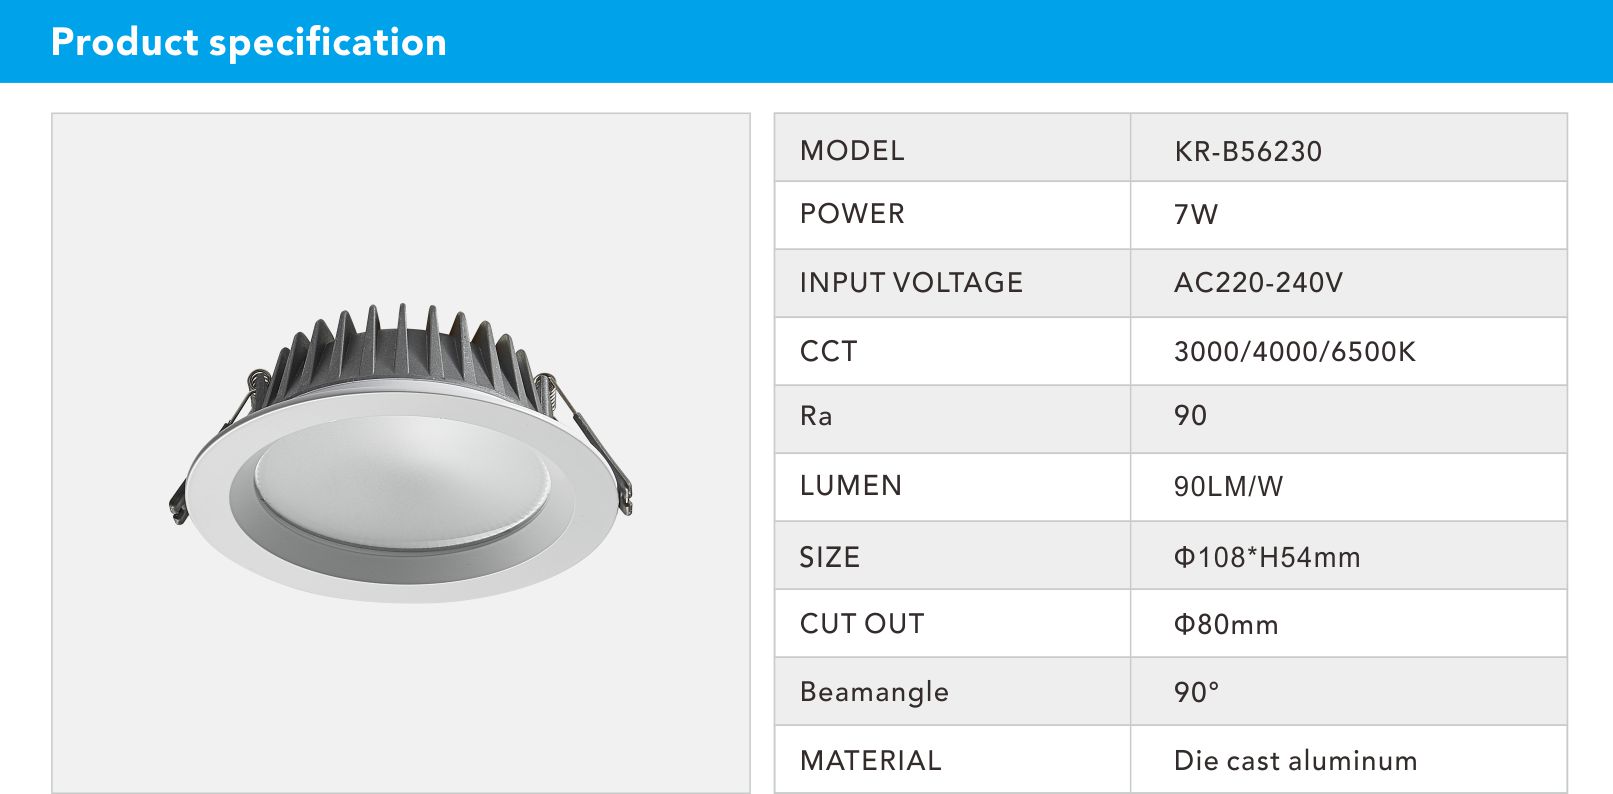 7W LED Recessed Downlight